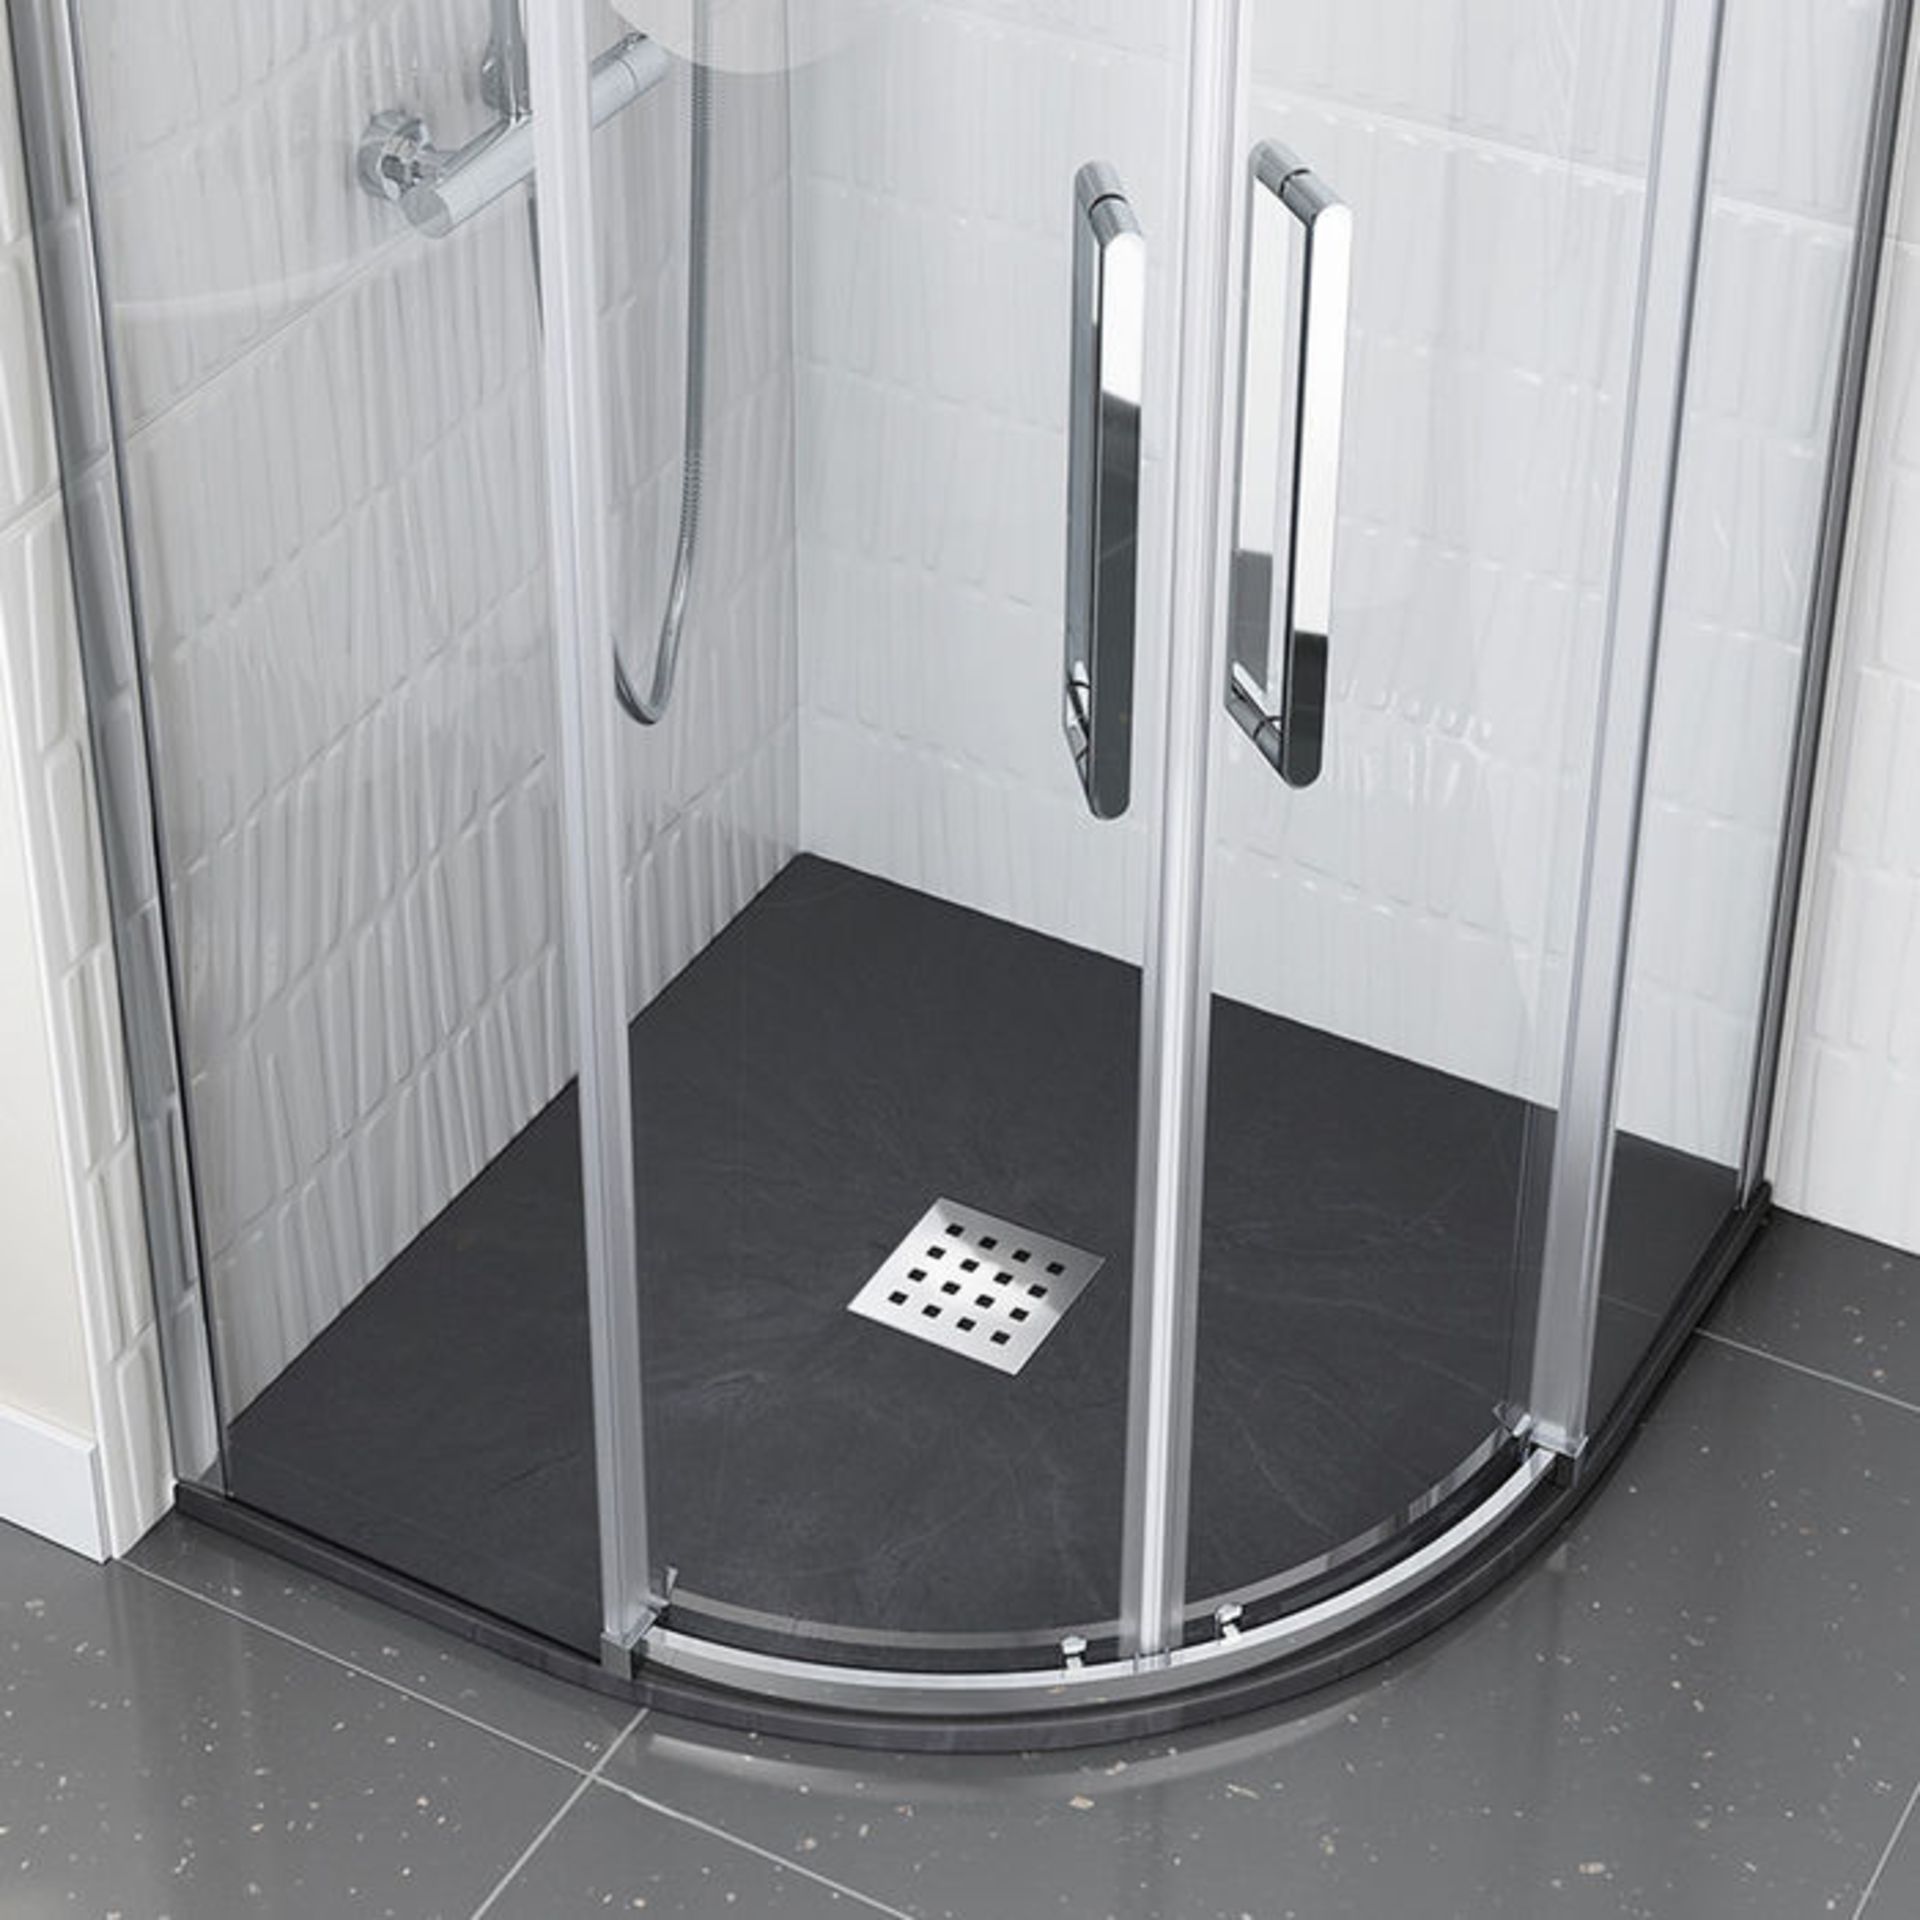 (U209) 900x900mm Quadrant Slate Effect Shower Tray & Chrome Waste. RRP £449.99. Hand crafted from